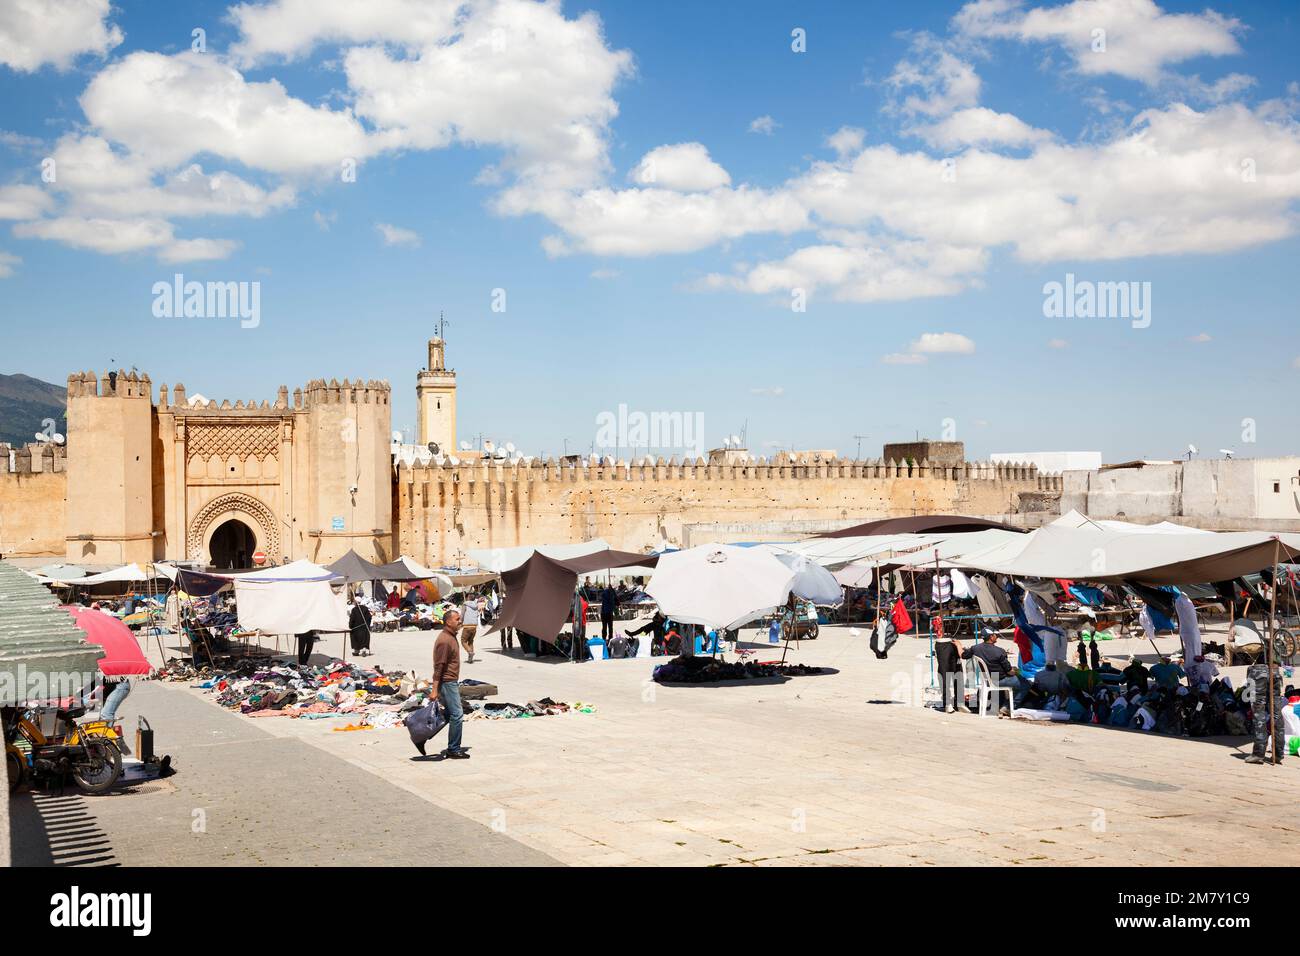 Fez, Marocco-April 23, 2014: Moroccans selling clothes on local market, many people watching and buying; Fes-Boulemane región, North Africa Stock Photo